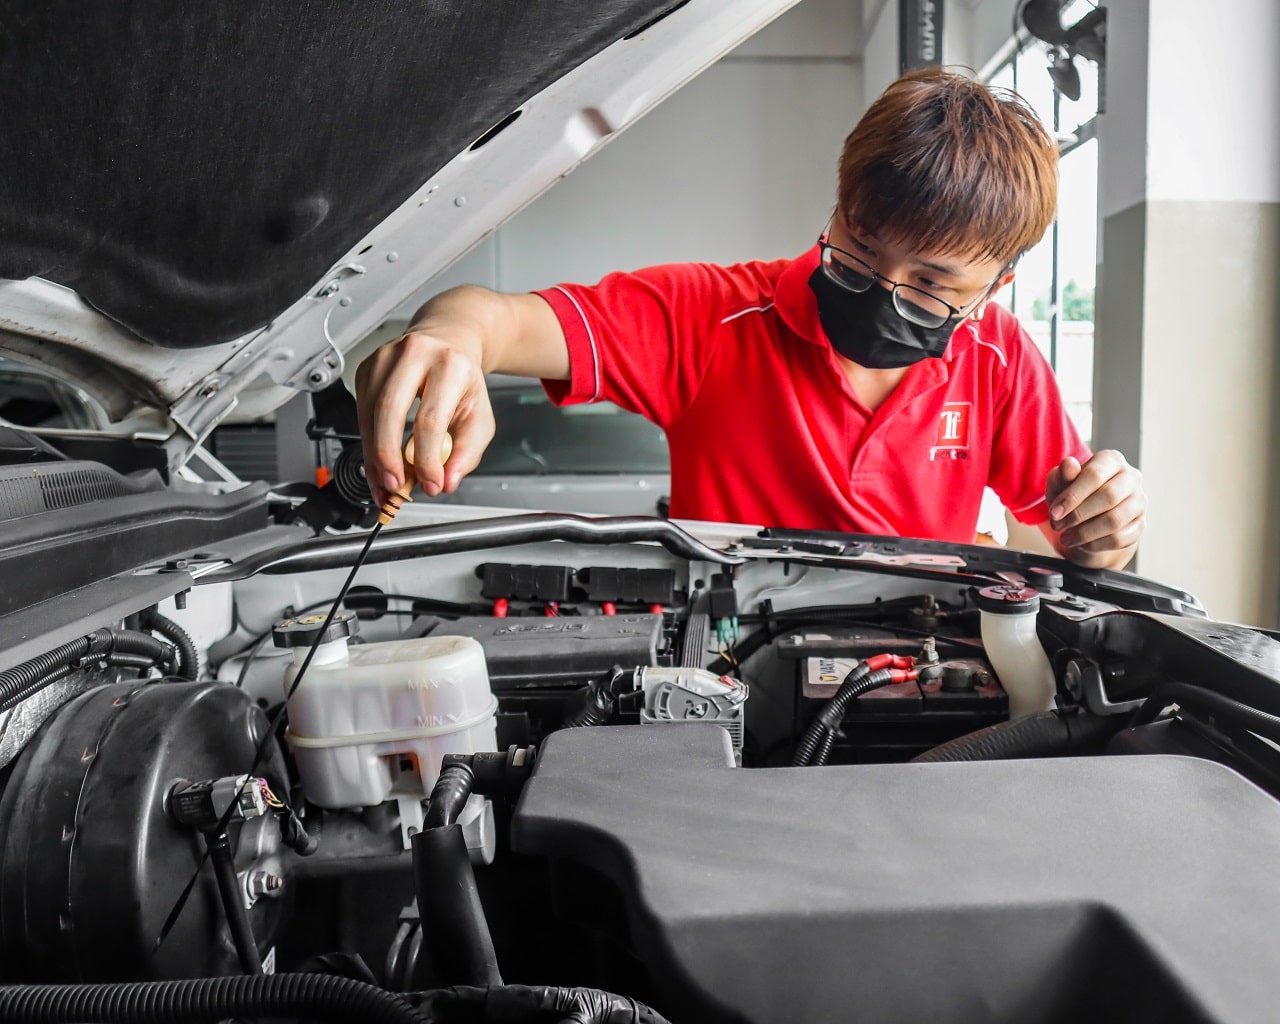 UK ﻿diploma in automotive technology by Techtra Automotive Academy-Techtra Automotive Academy (Diploma in Automotive Technology) Best Auto College in Malaysia Kuala Lumpur) 2022-2023 Automotive Technology Academy Study Diploma in Malaysia KL Kuala Lumpur - Techtra Automotive College in Malaysia